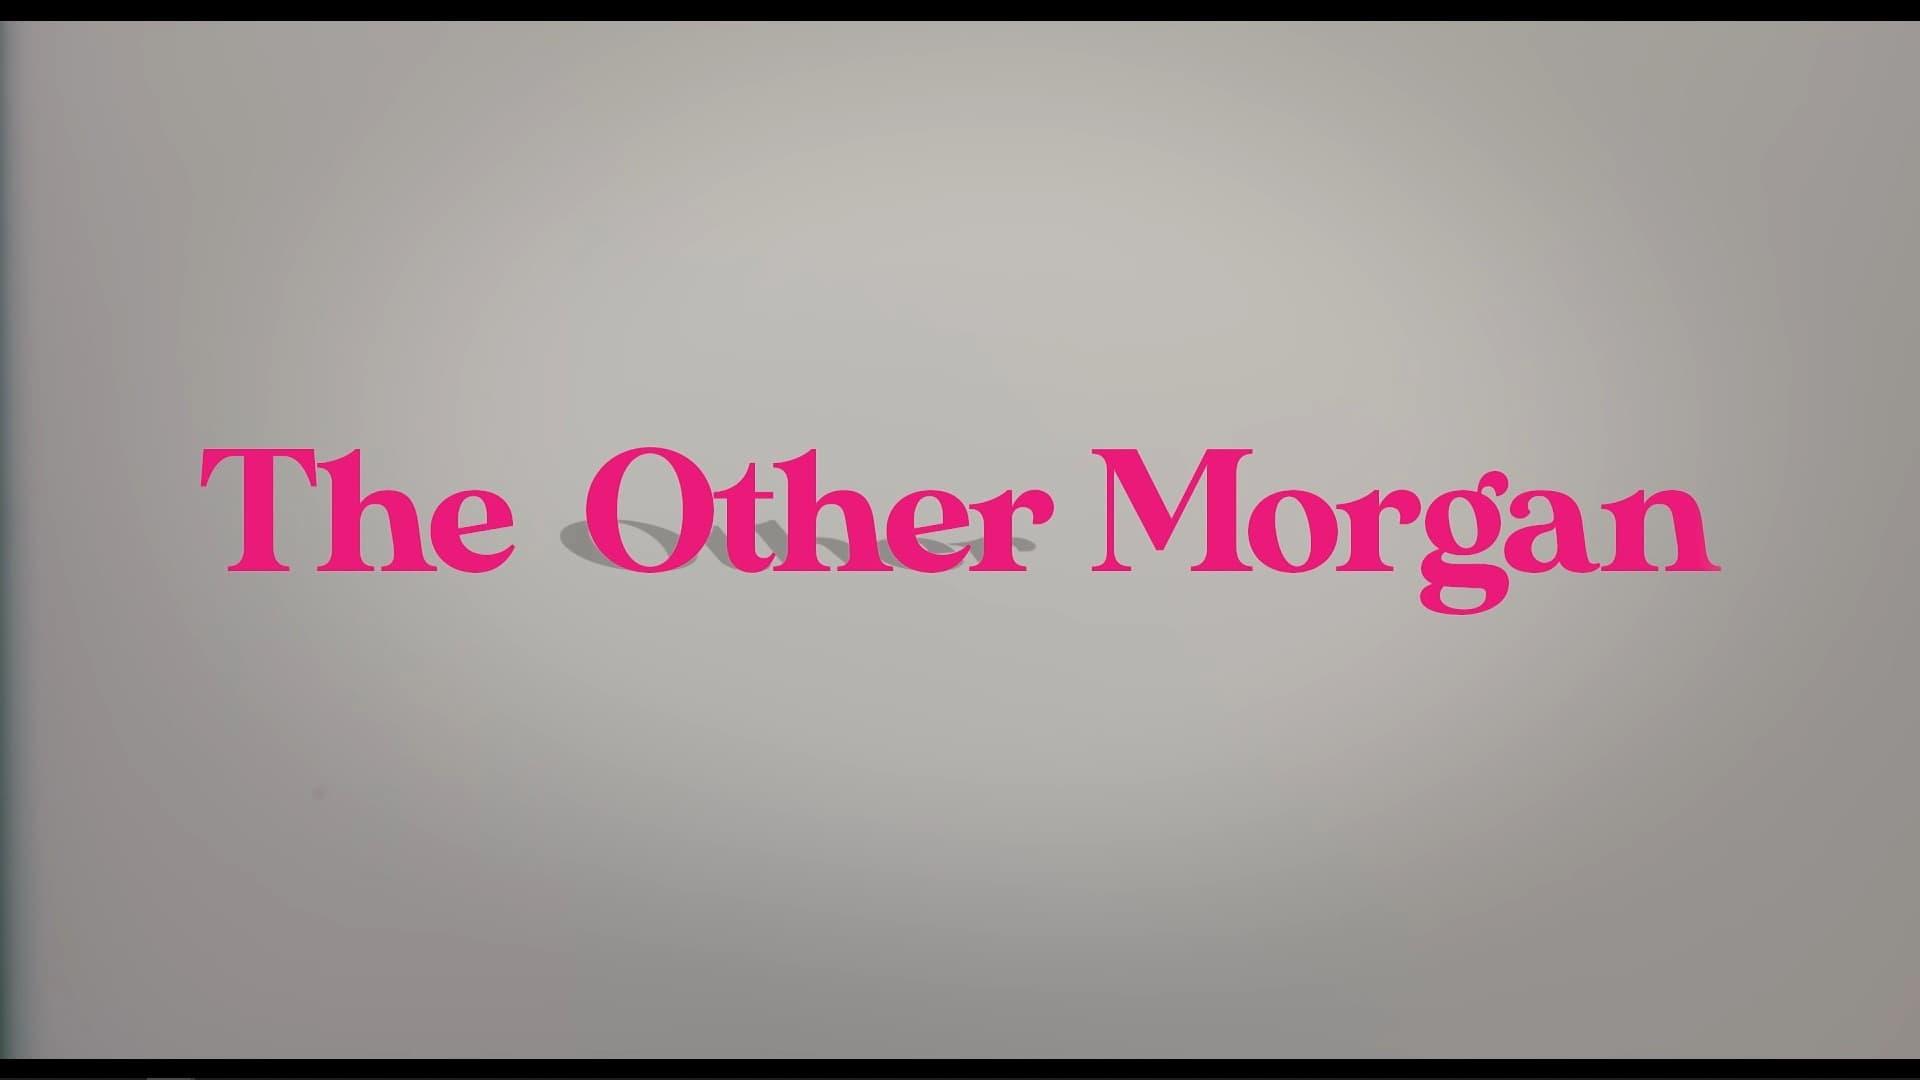 The Other Morgan backdrop